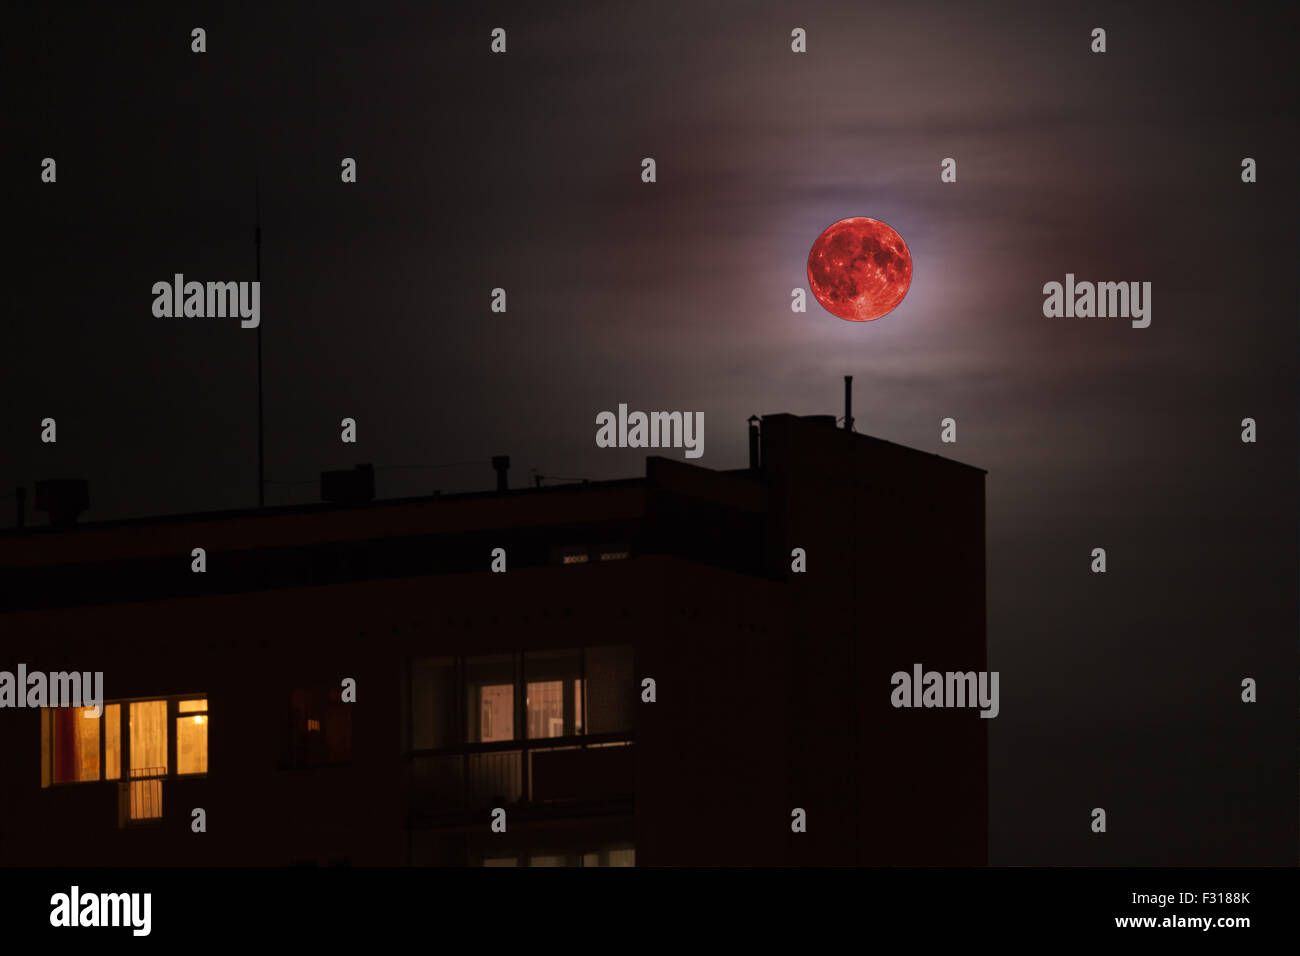 Red full moon in red color also called bloodmoon on the background of building. Stock Photo